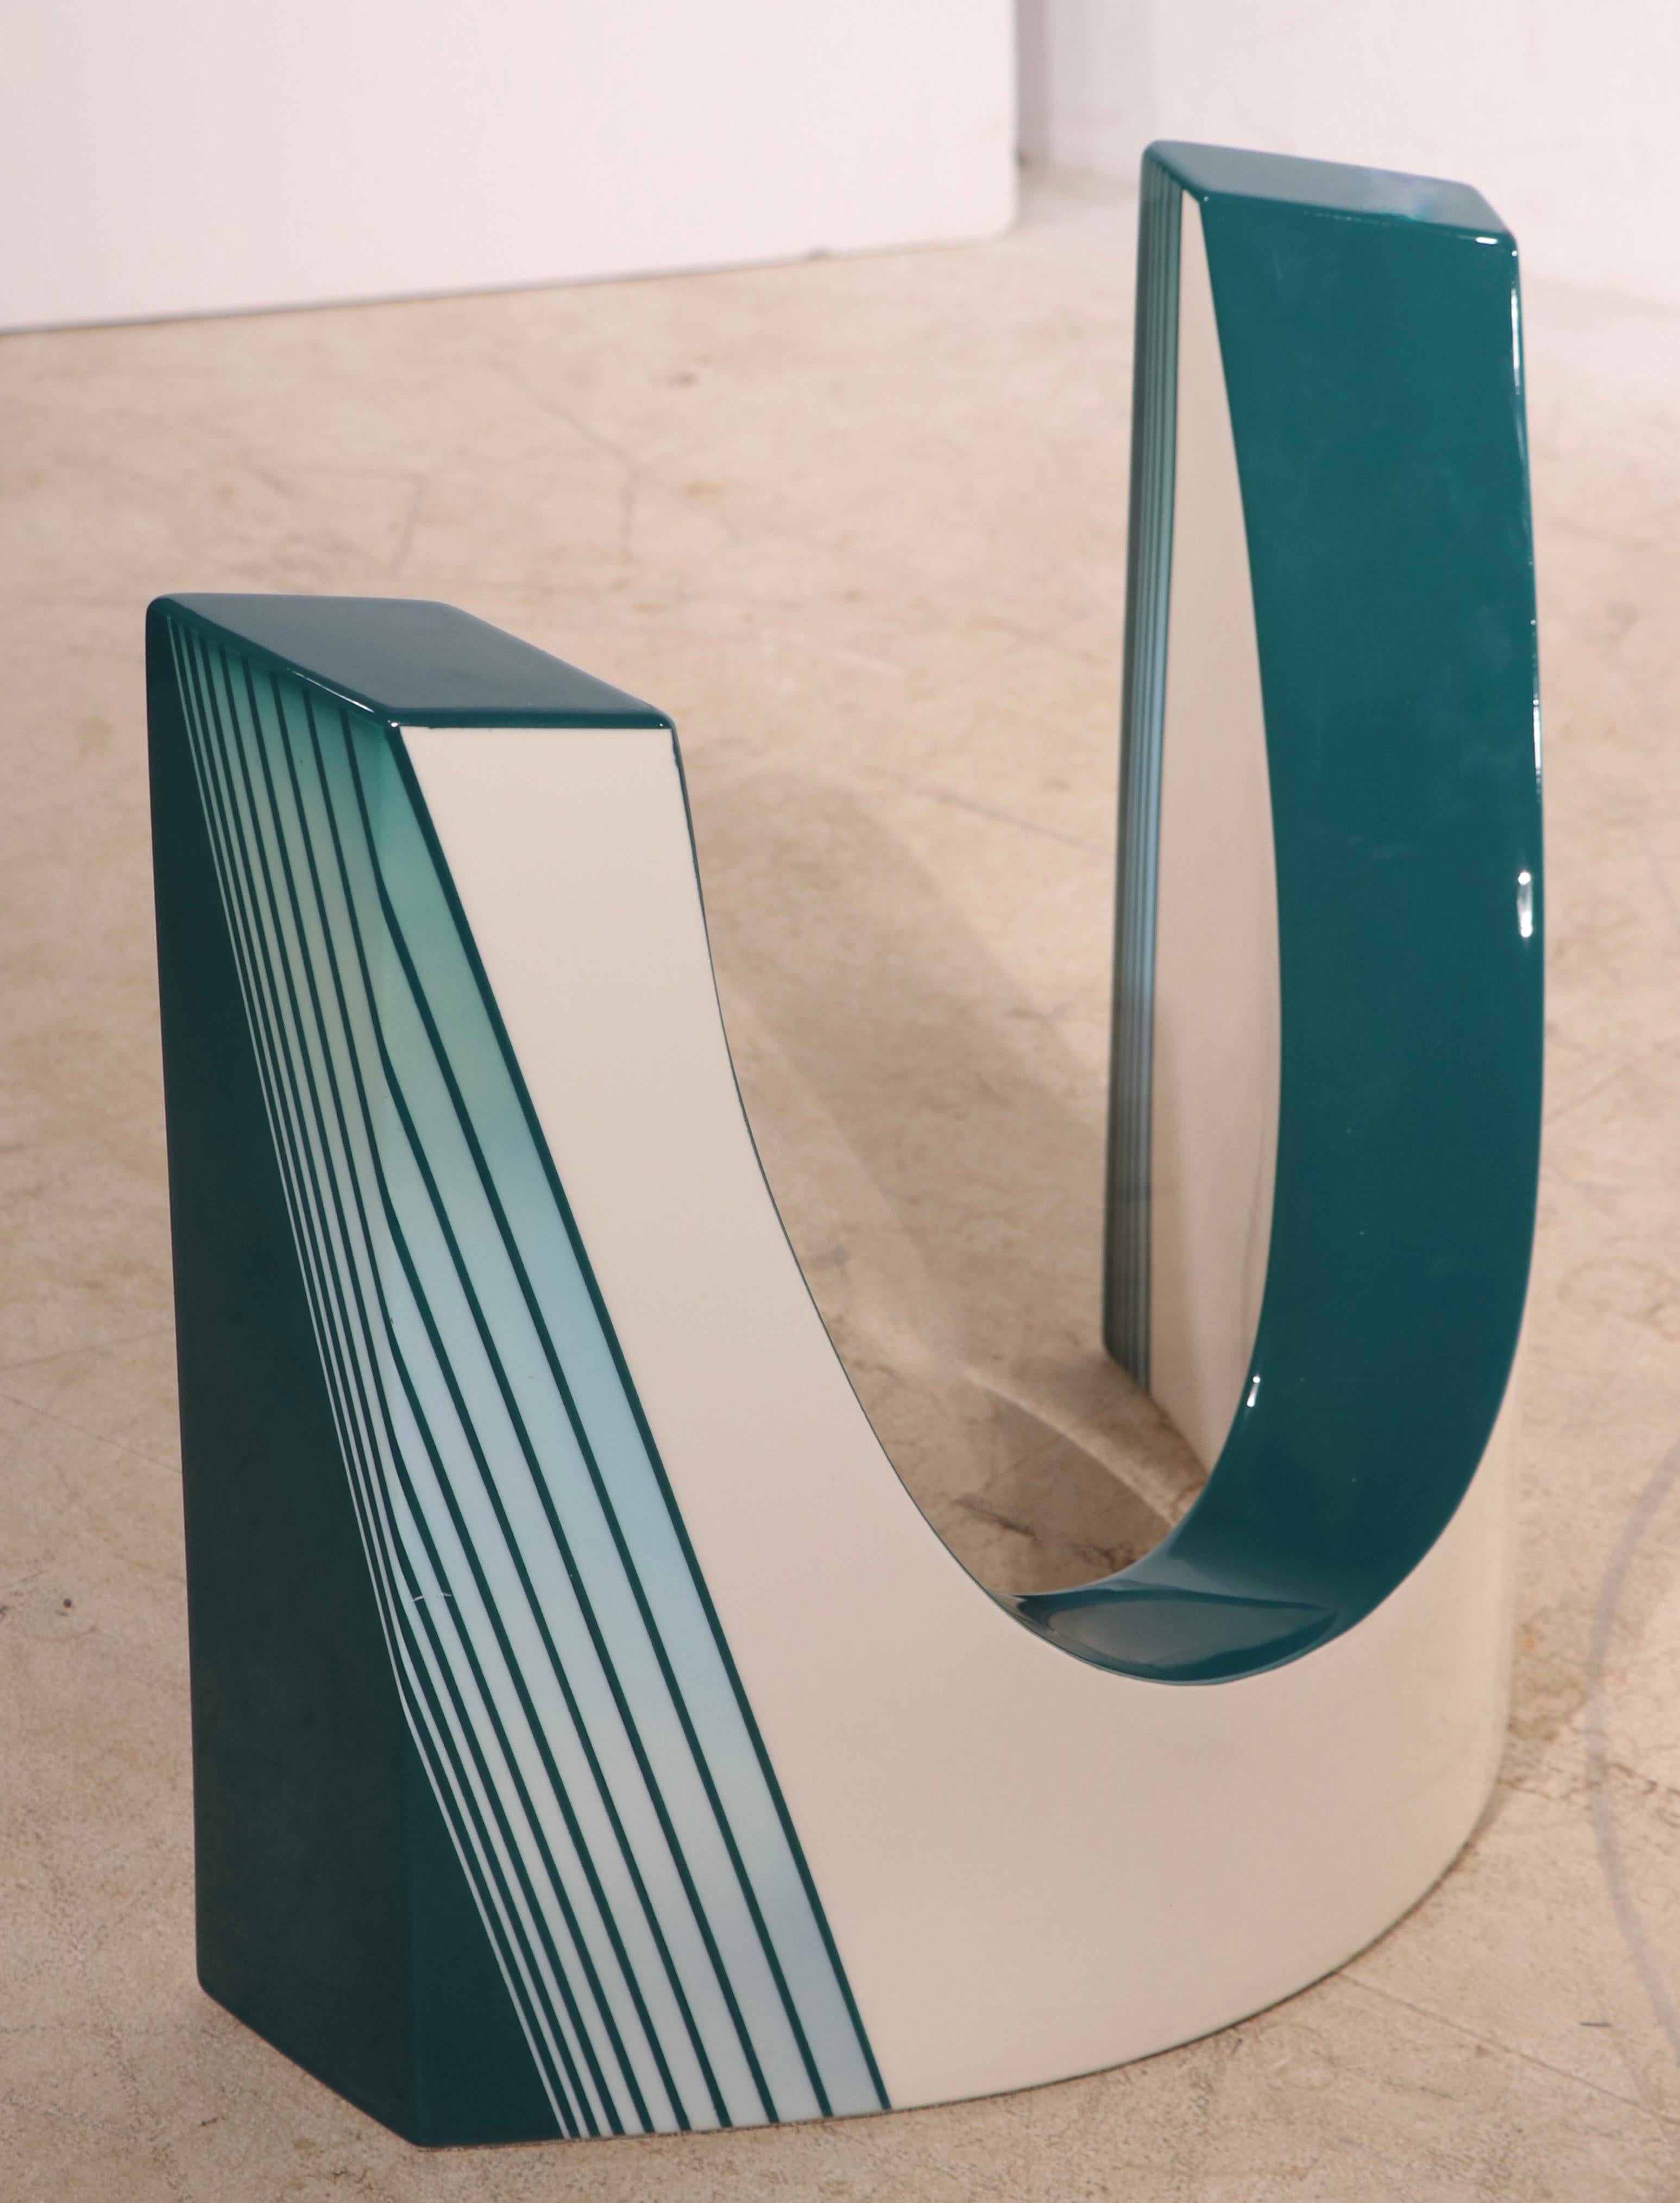 Intriguing Post Modern, Memphis style coffee table having opposing curved bases, of turquoise and white enameled metal, which support the thick ( .75 in ) bevelled glass top. The table is in very fine, original, clean and ready to use condition, it